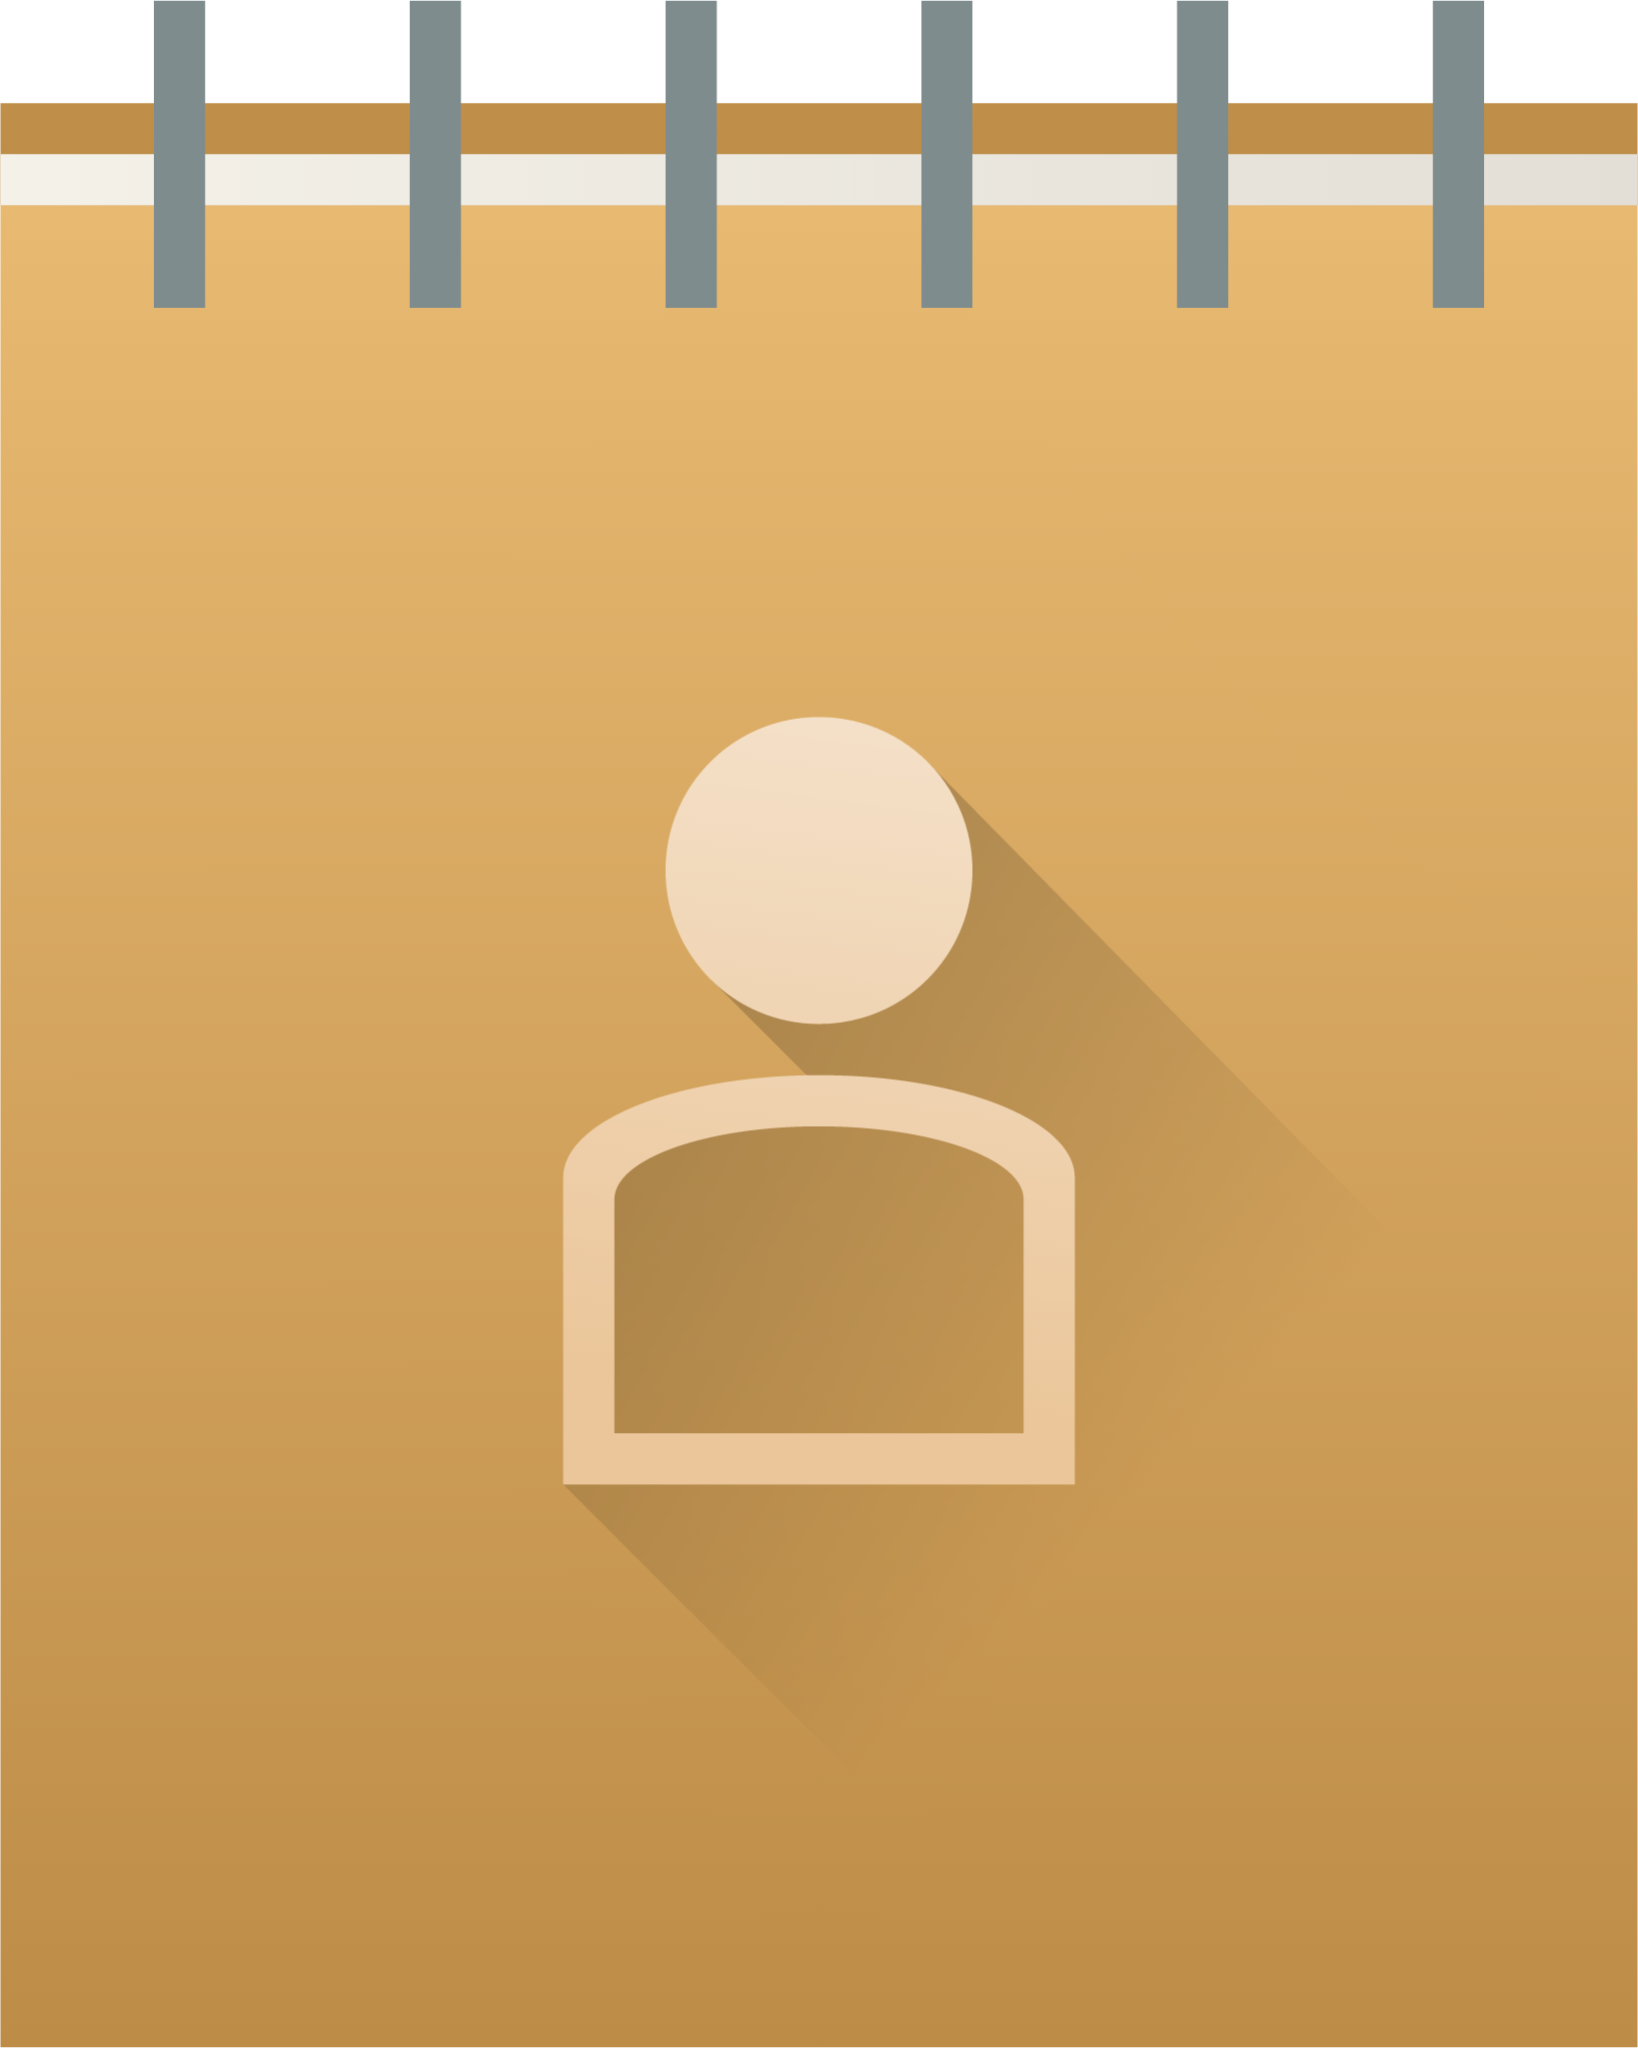 office address book icon